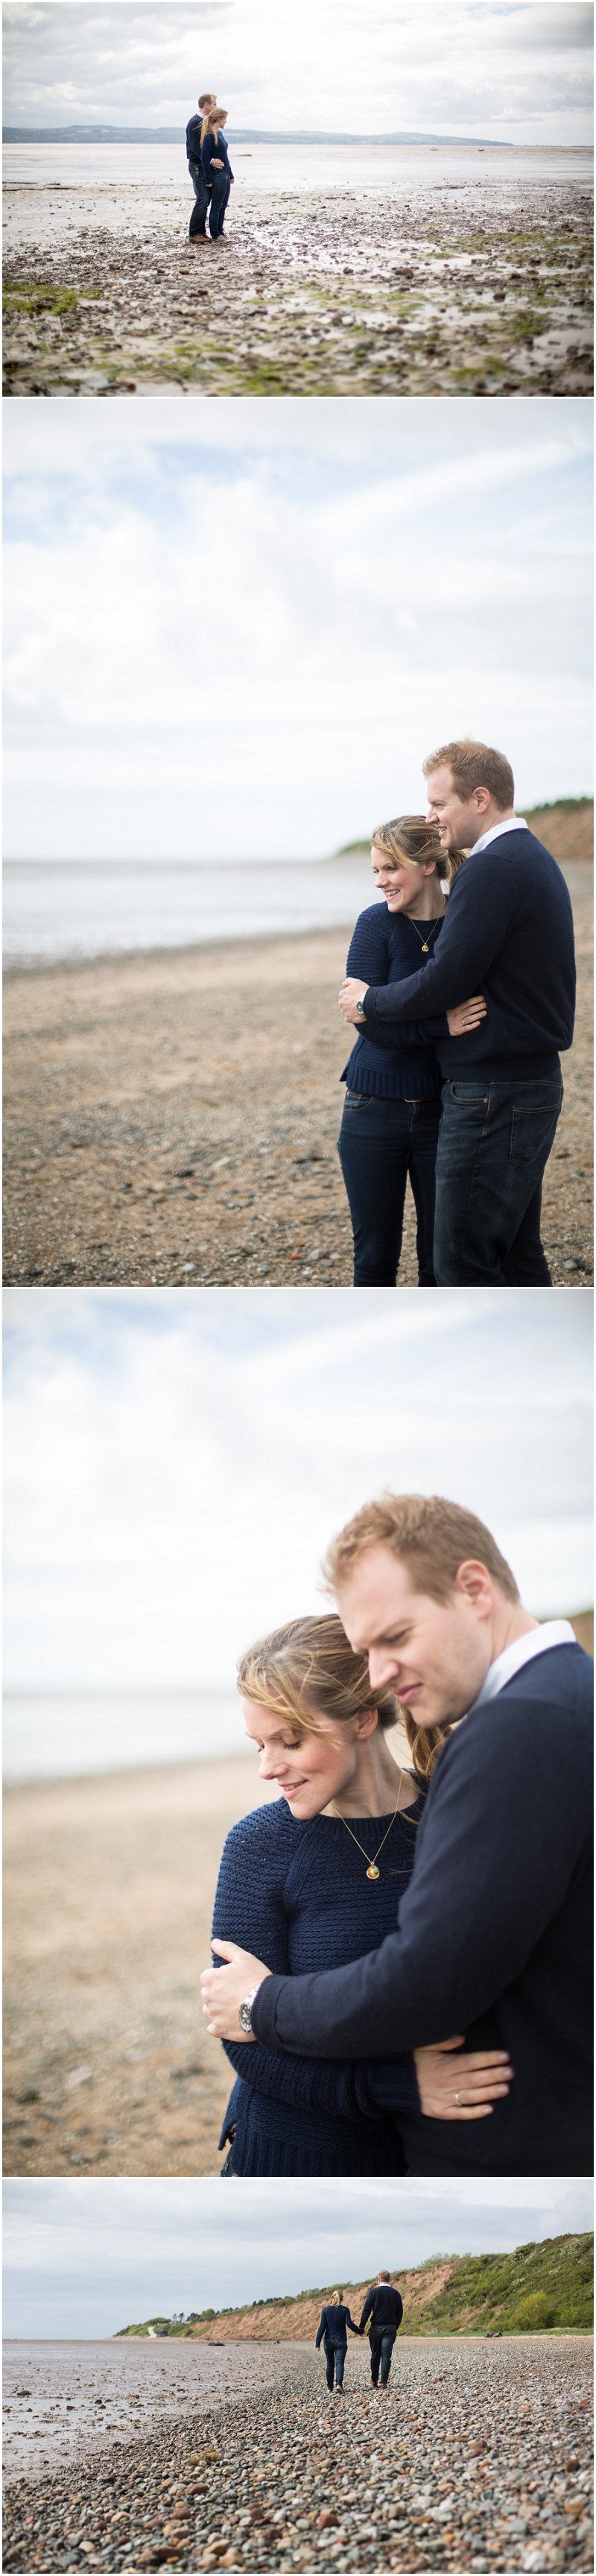 Beach Pre Wedding Photography Wirral Country Park Liverpool